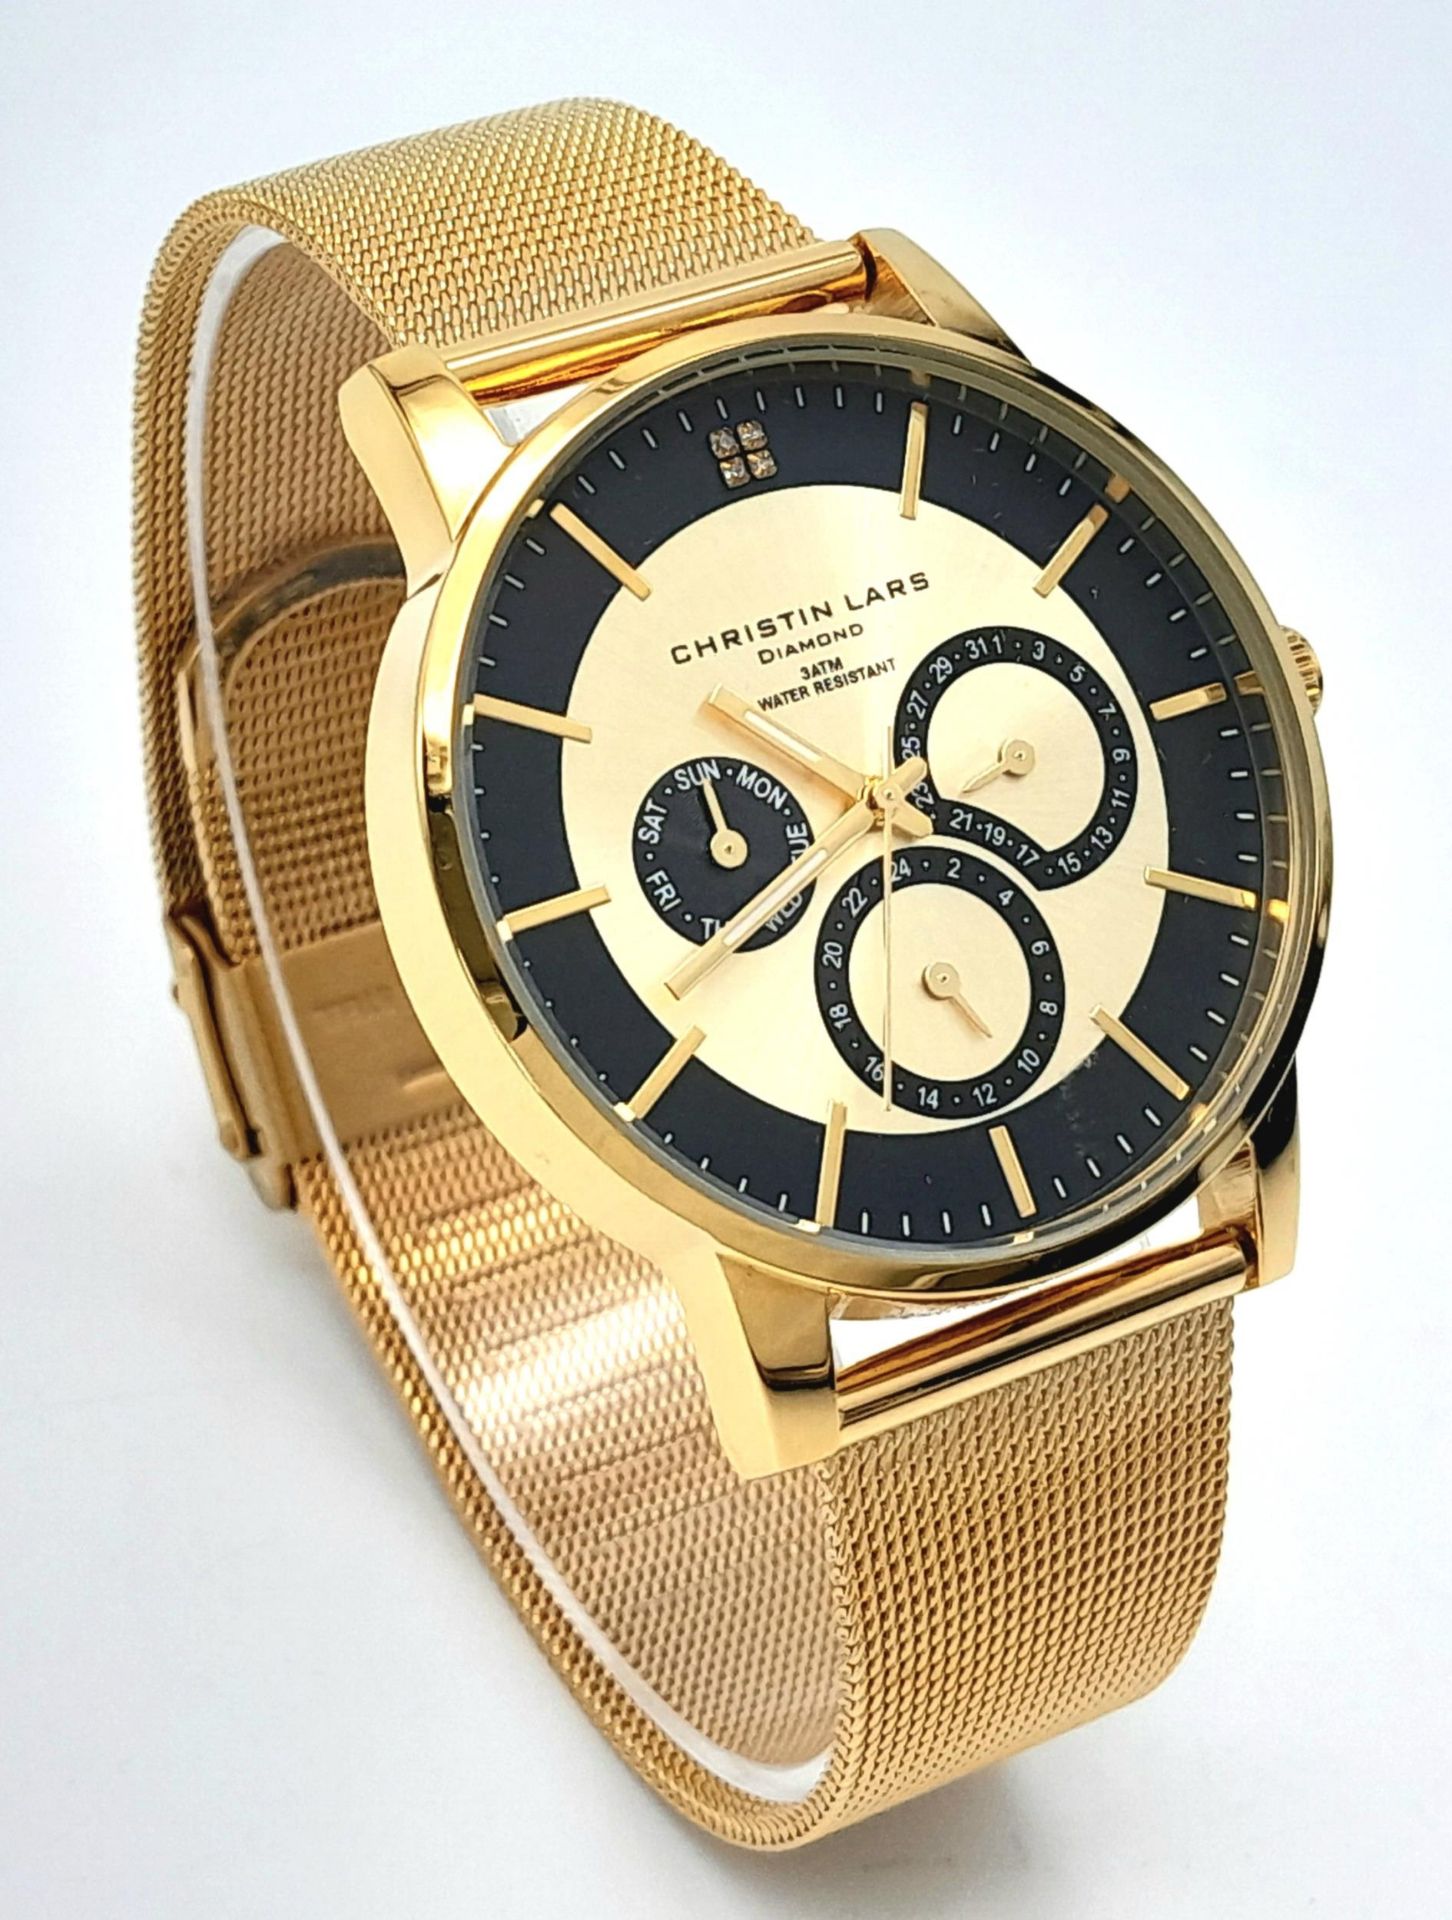 An Unworn Christian Lars Gold Tone Diamond Set Watch. 41mm Case. Replacement Battery Fitted April